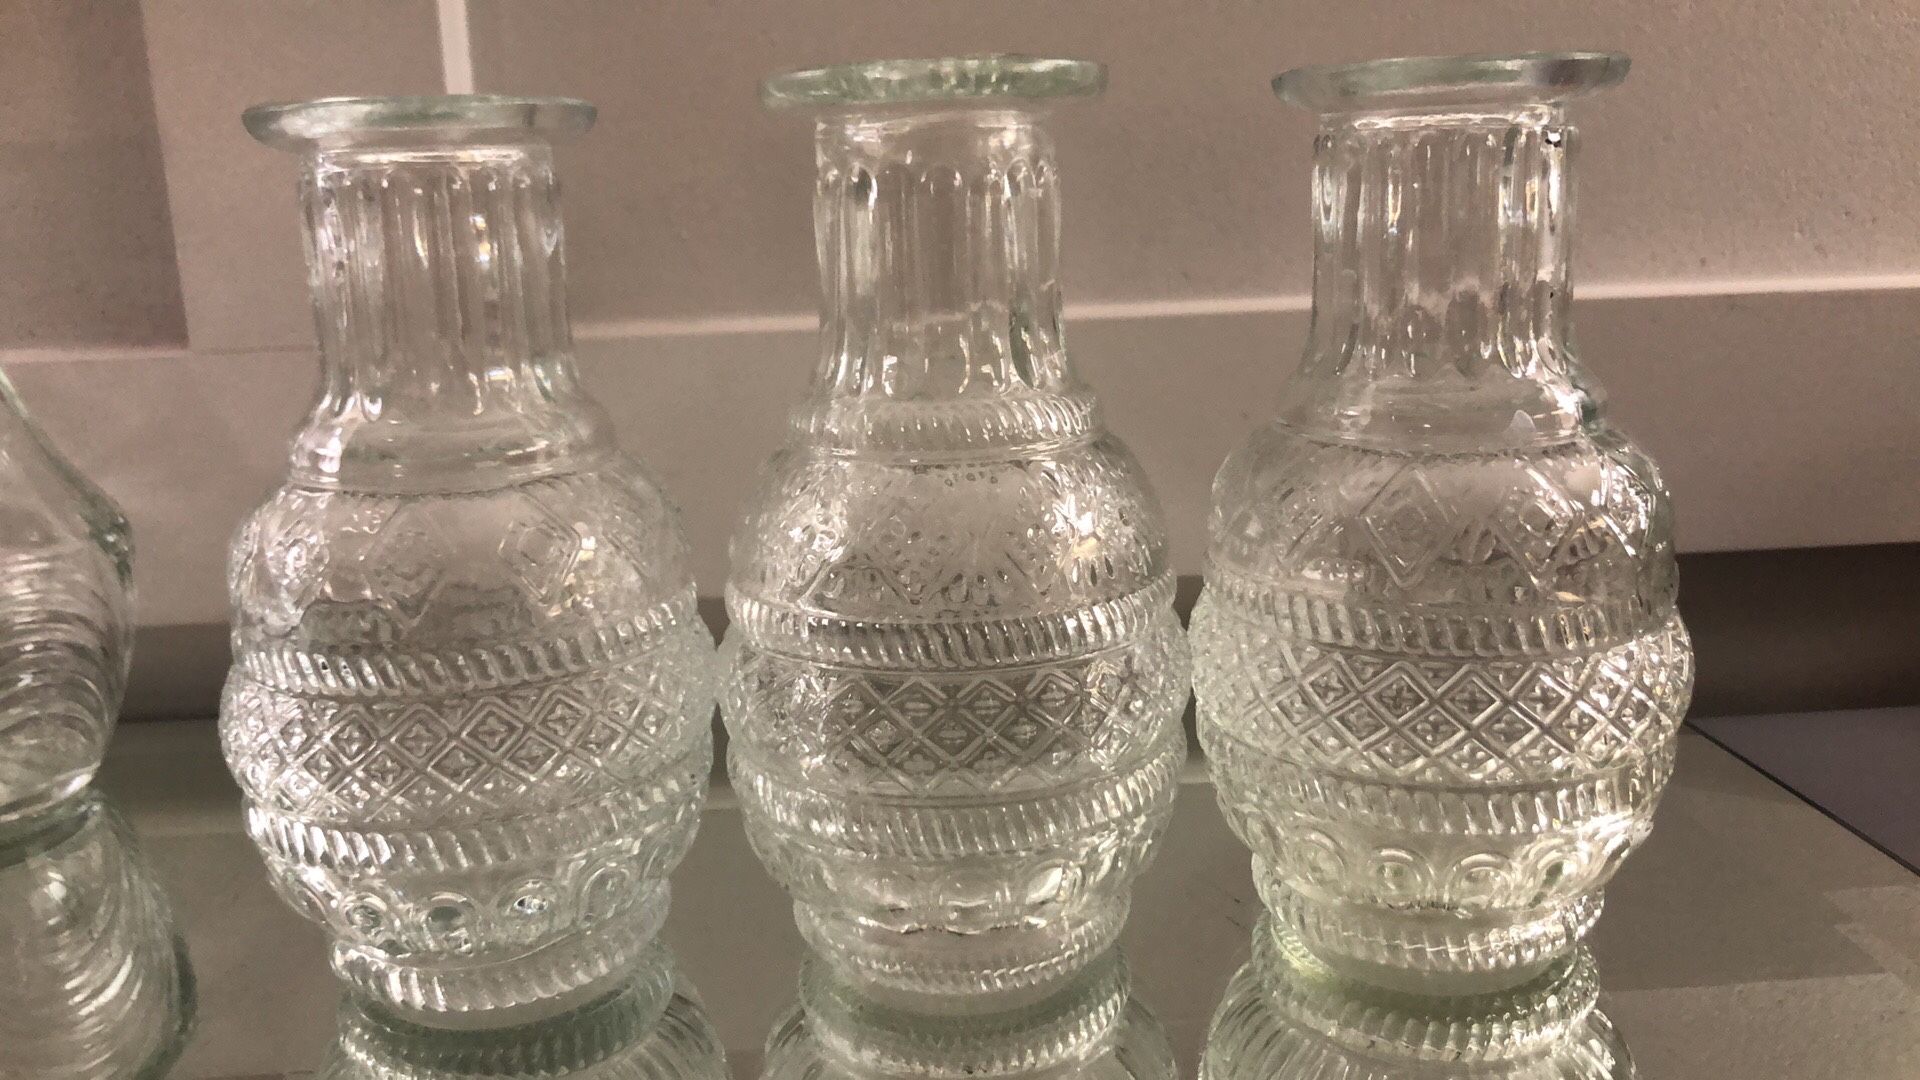 price Slashed! All (7) $15Clear Detailed Design Vintage Glass Round Bud Vase Height 5.25 total count 